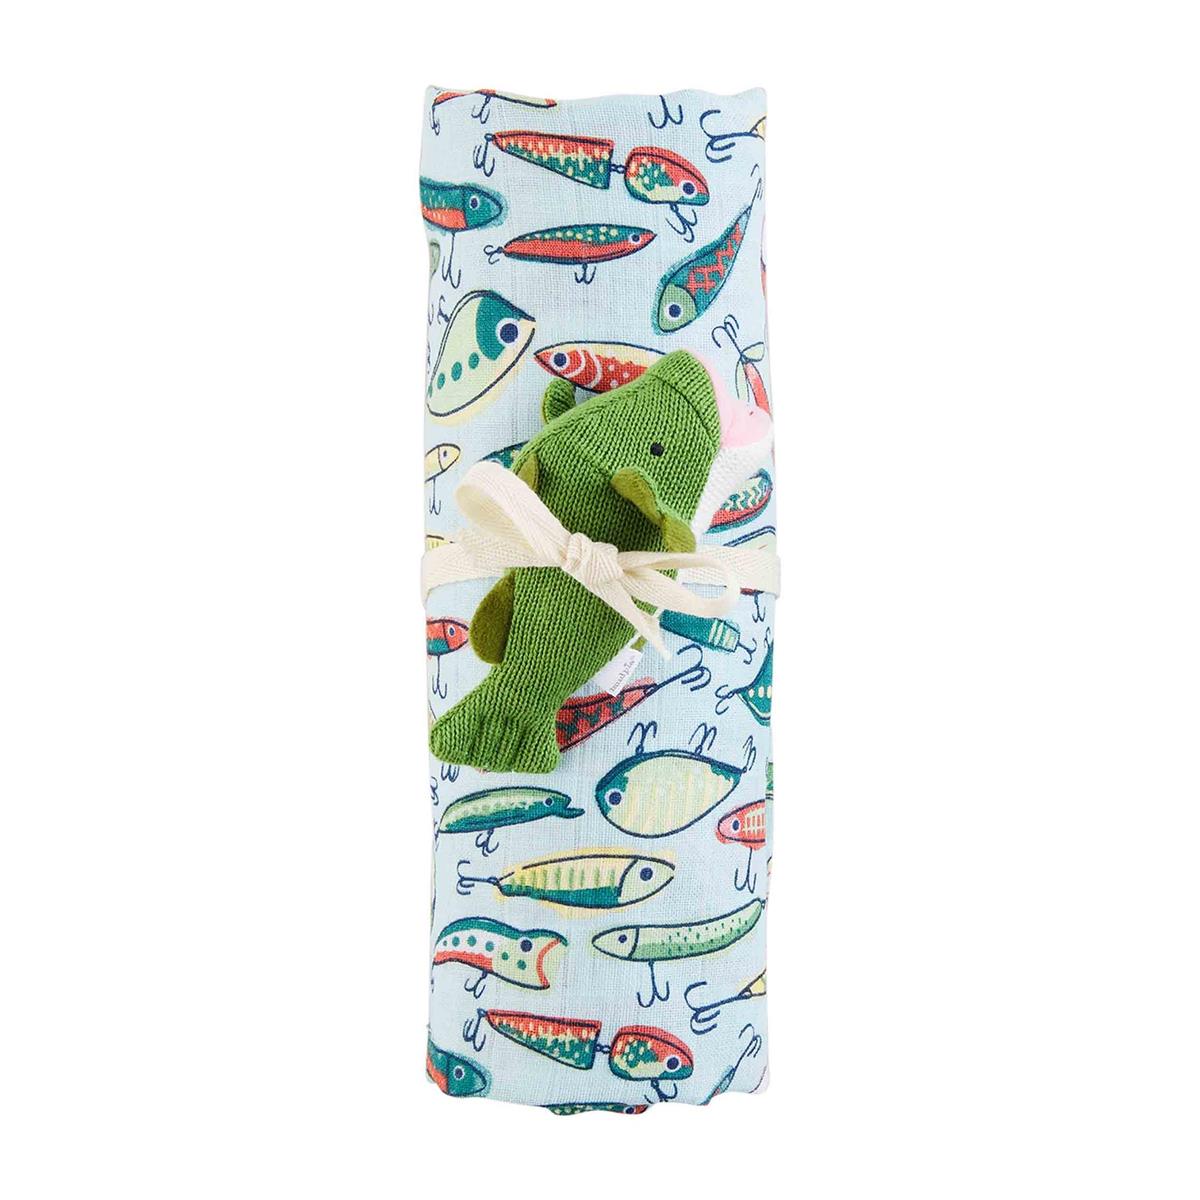 Fishing Lure Swaddle and Rattle